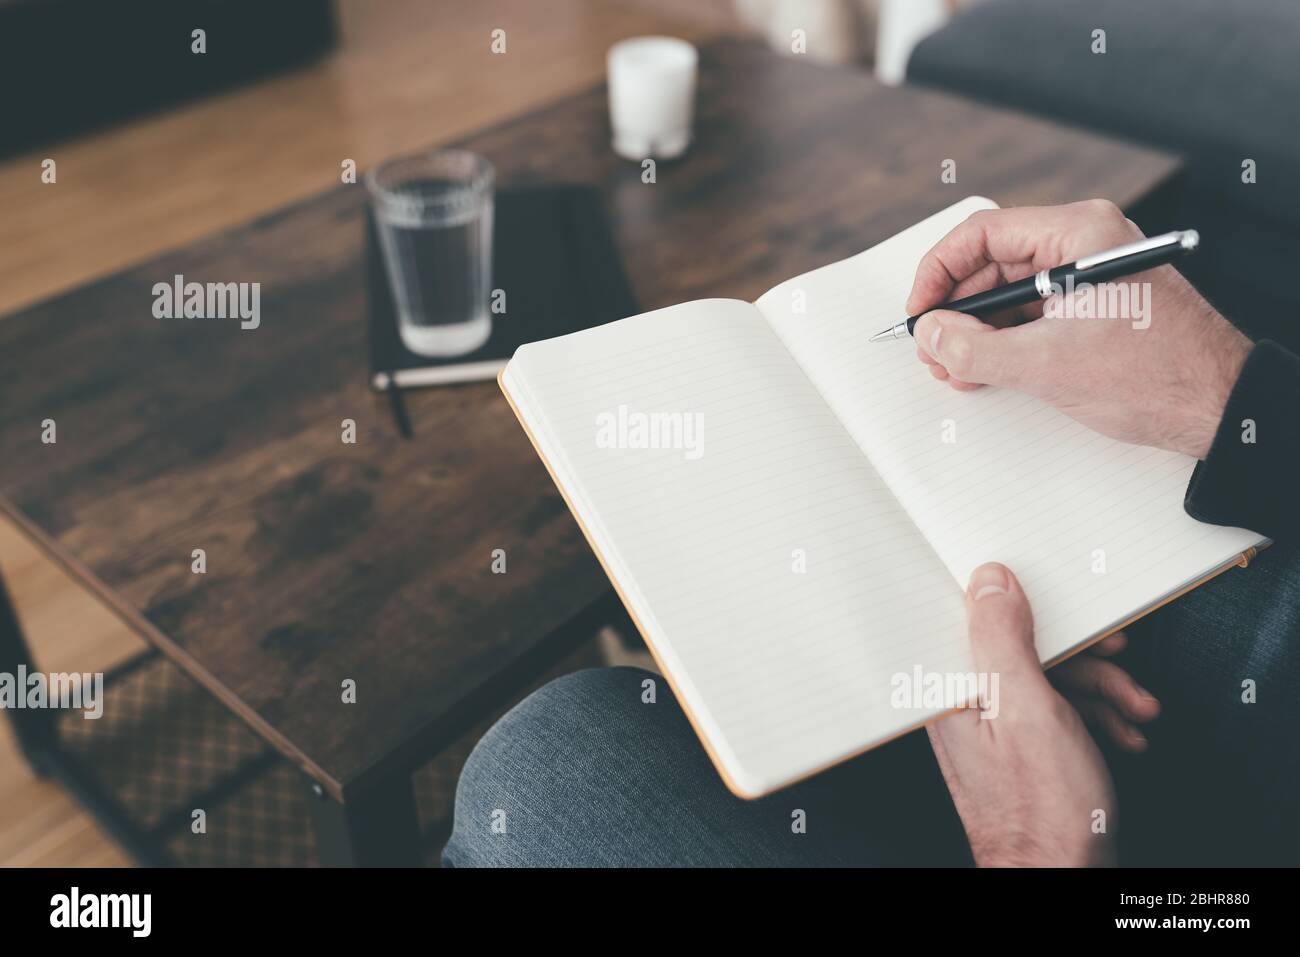 high angle view of man sitting on sofa taking notes in diary or journal on his legs Stock Photo